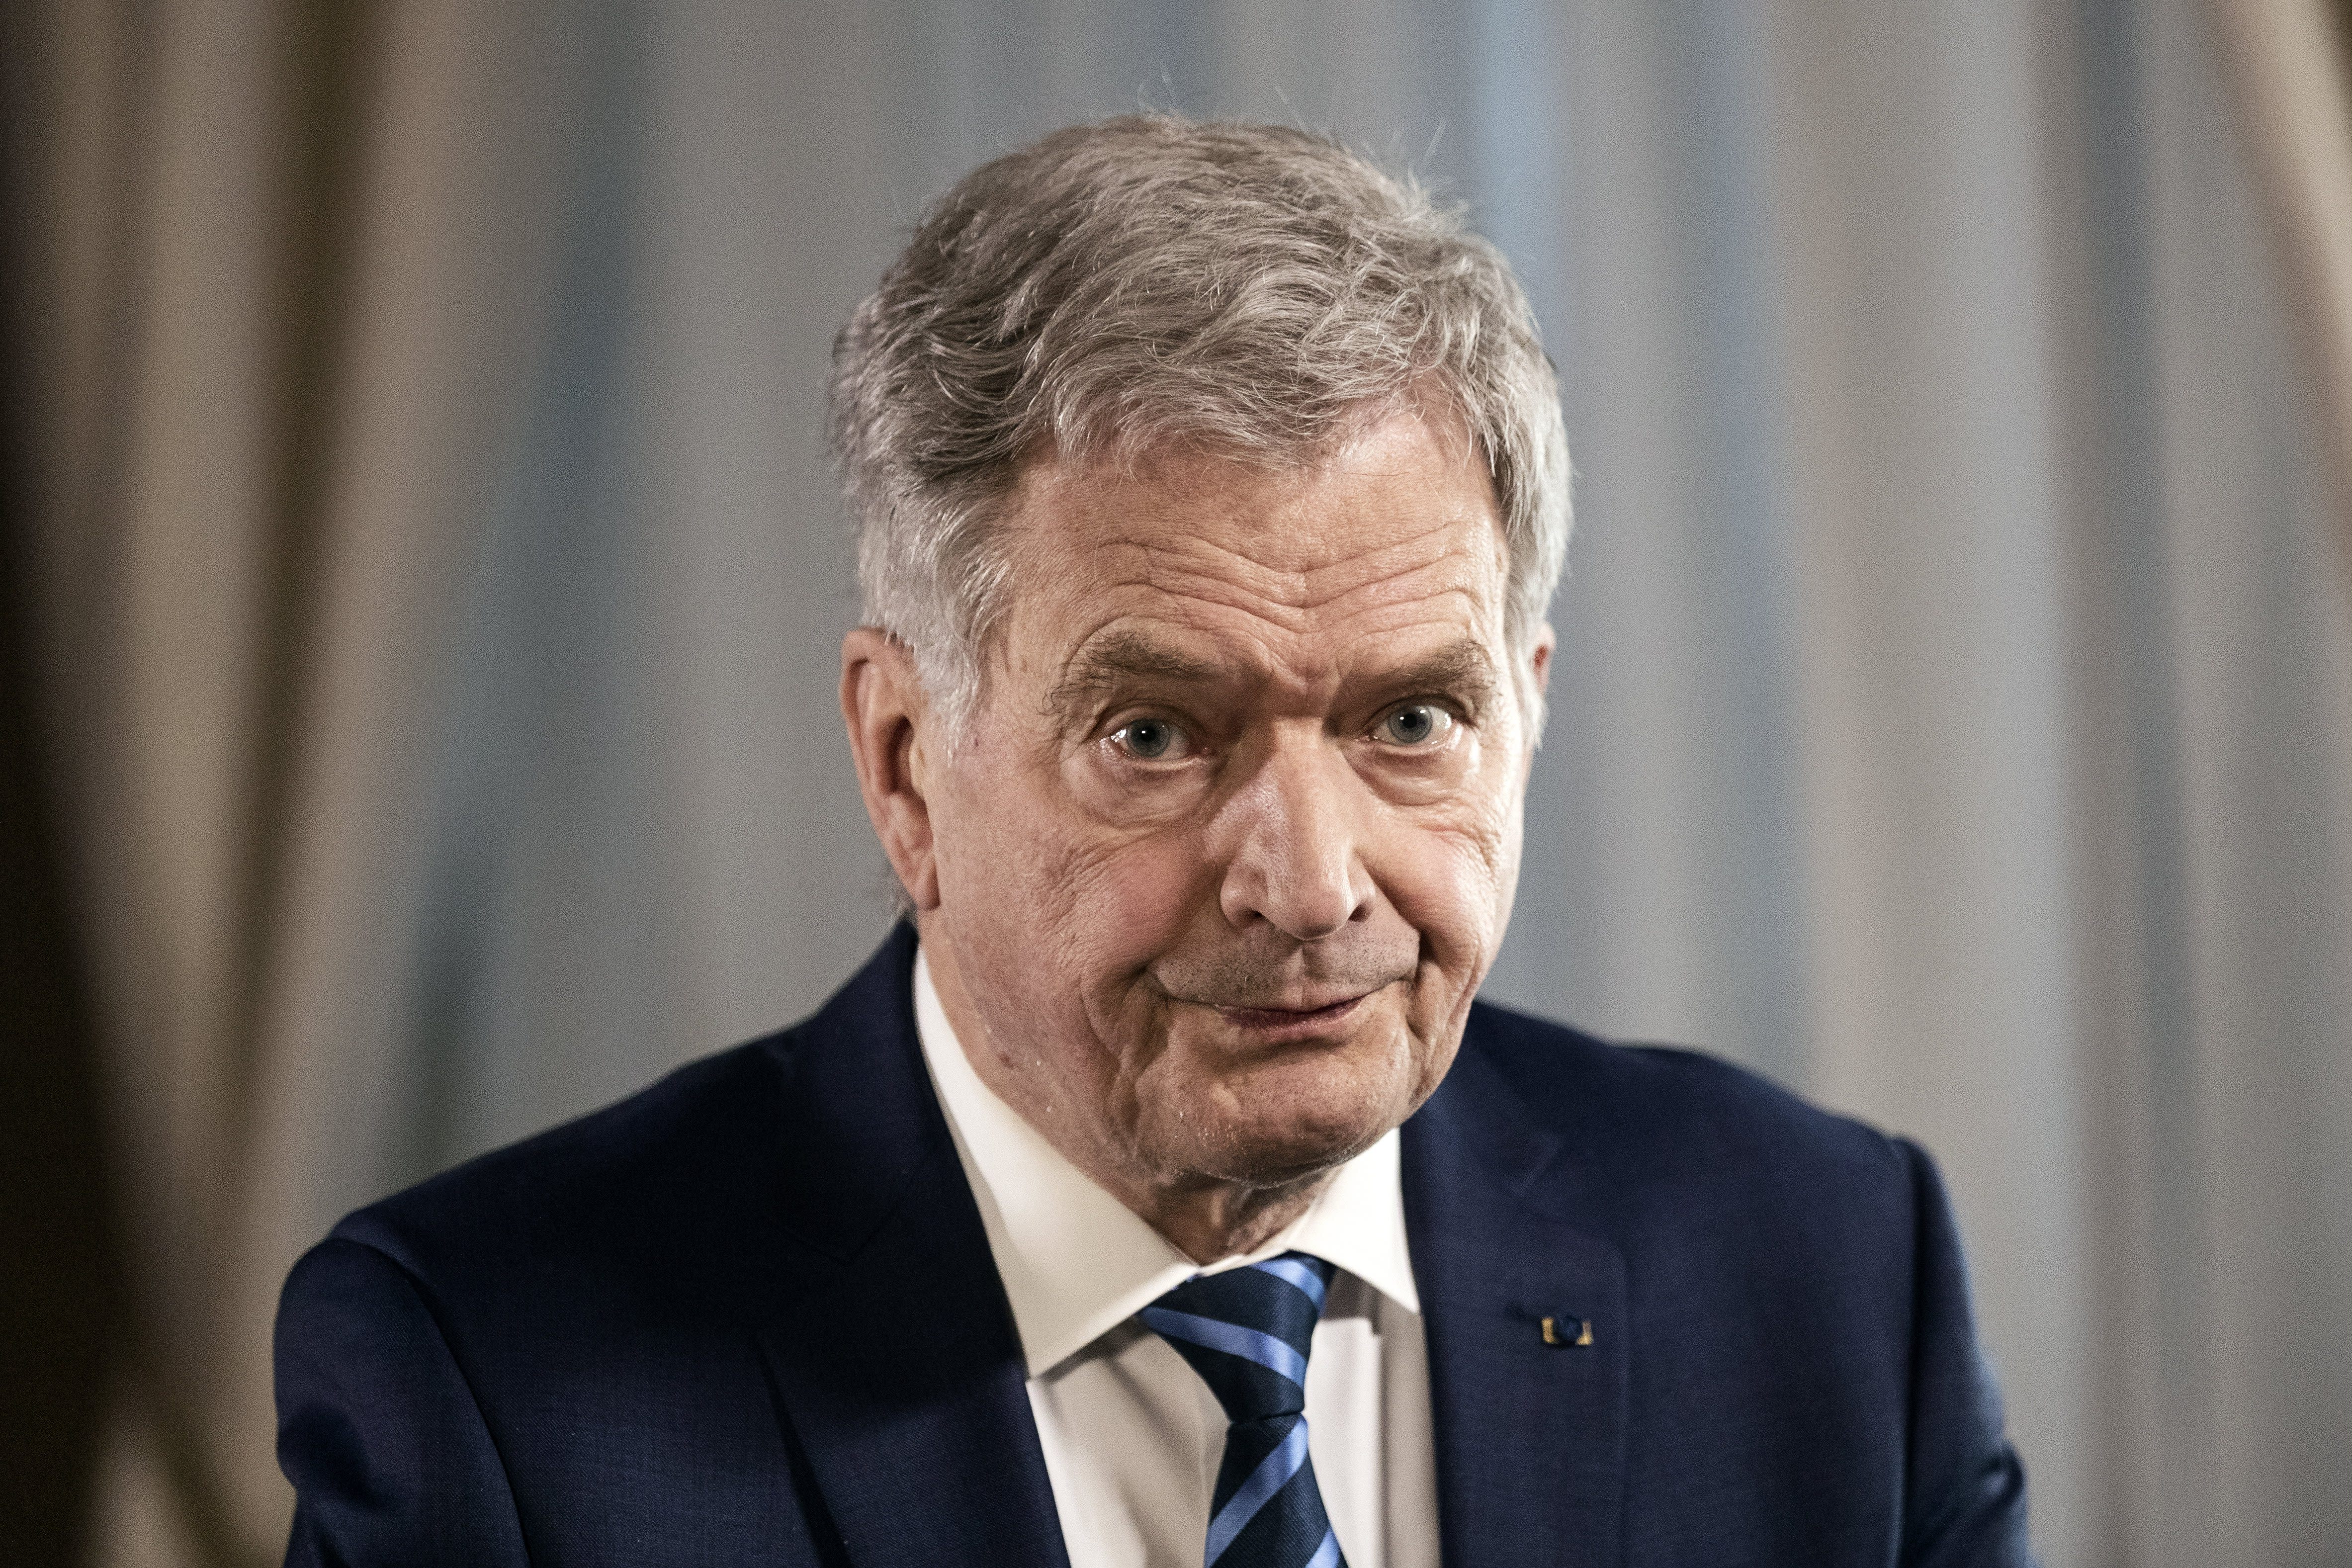 Niinistö will discuss security in Europe and the situation in Ukraine with US President Biden